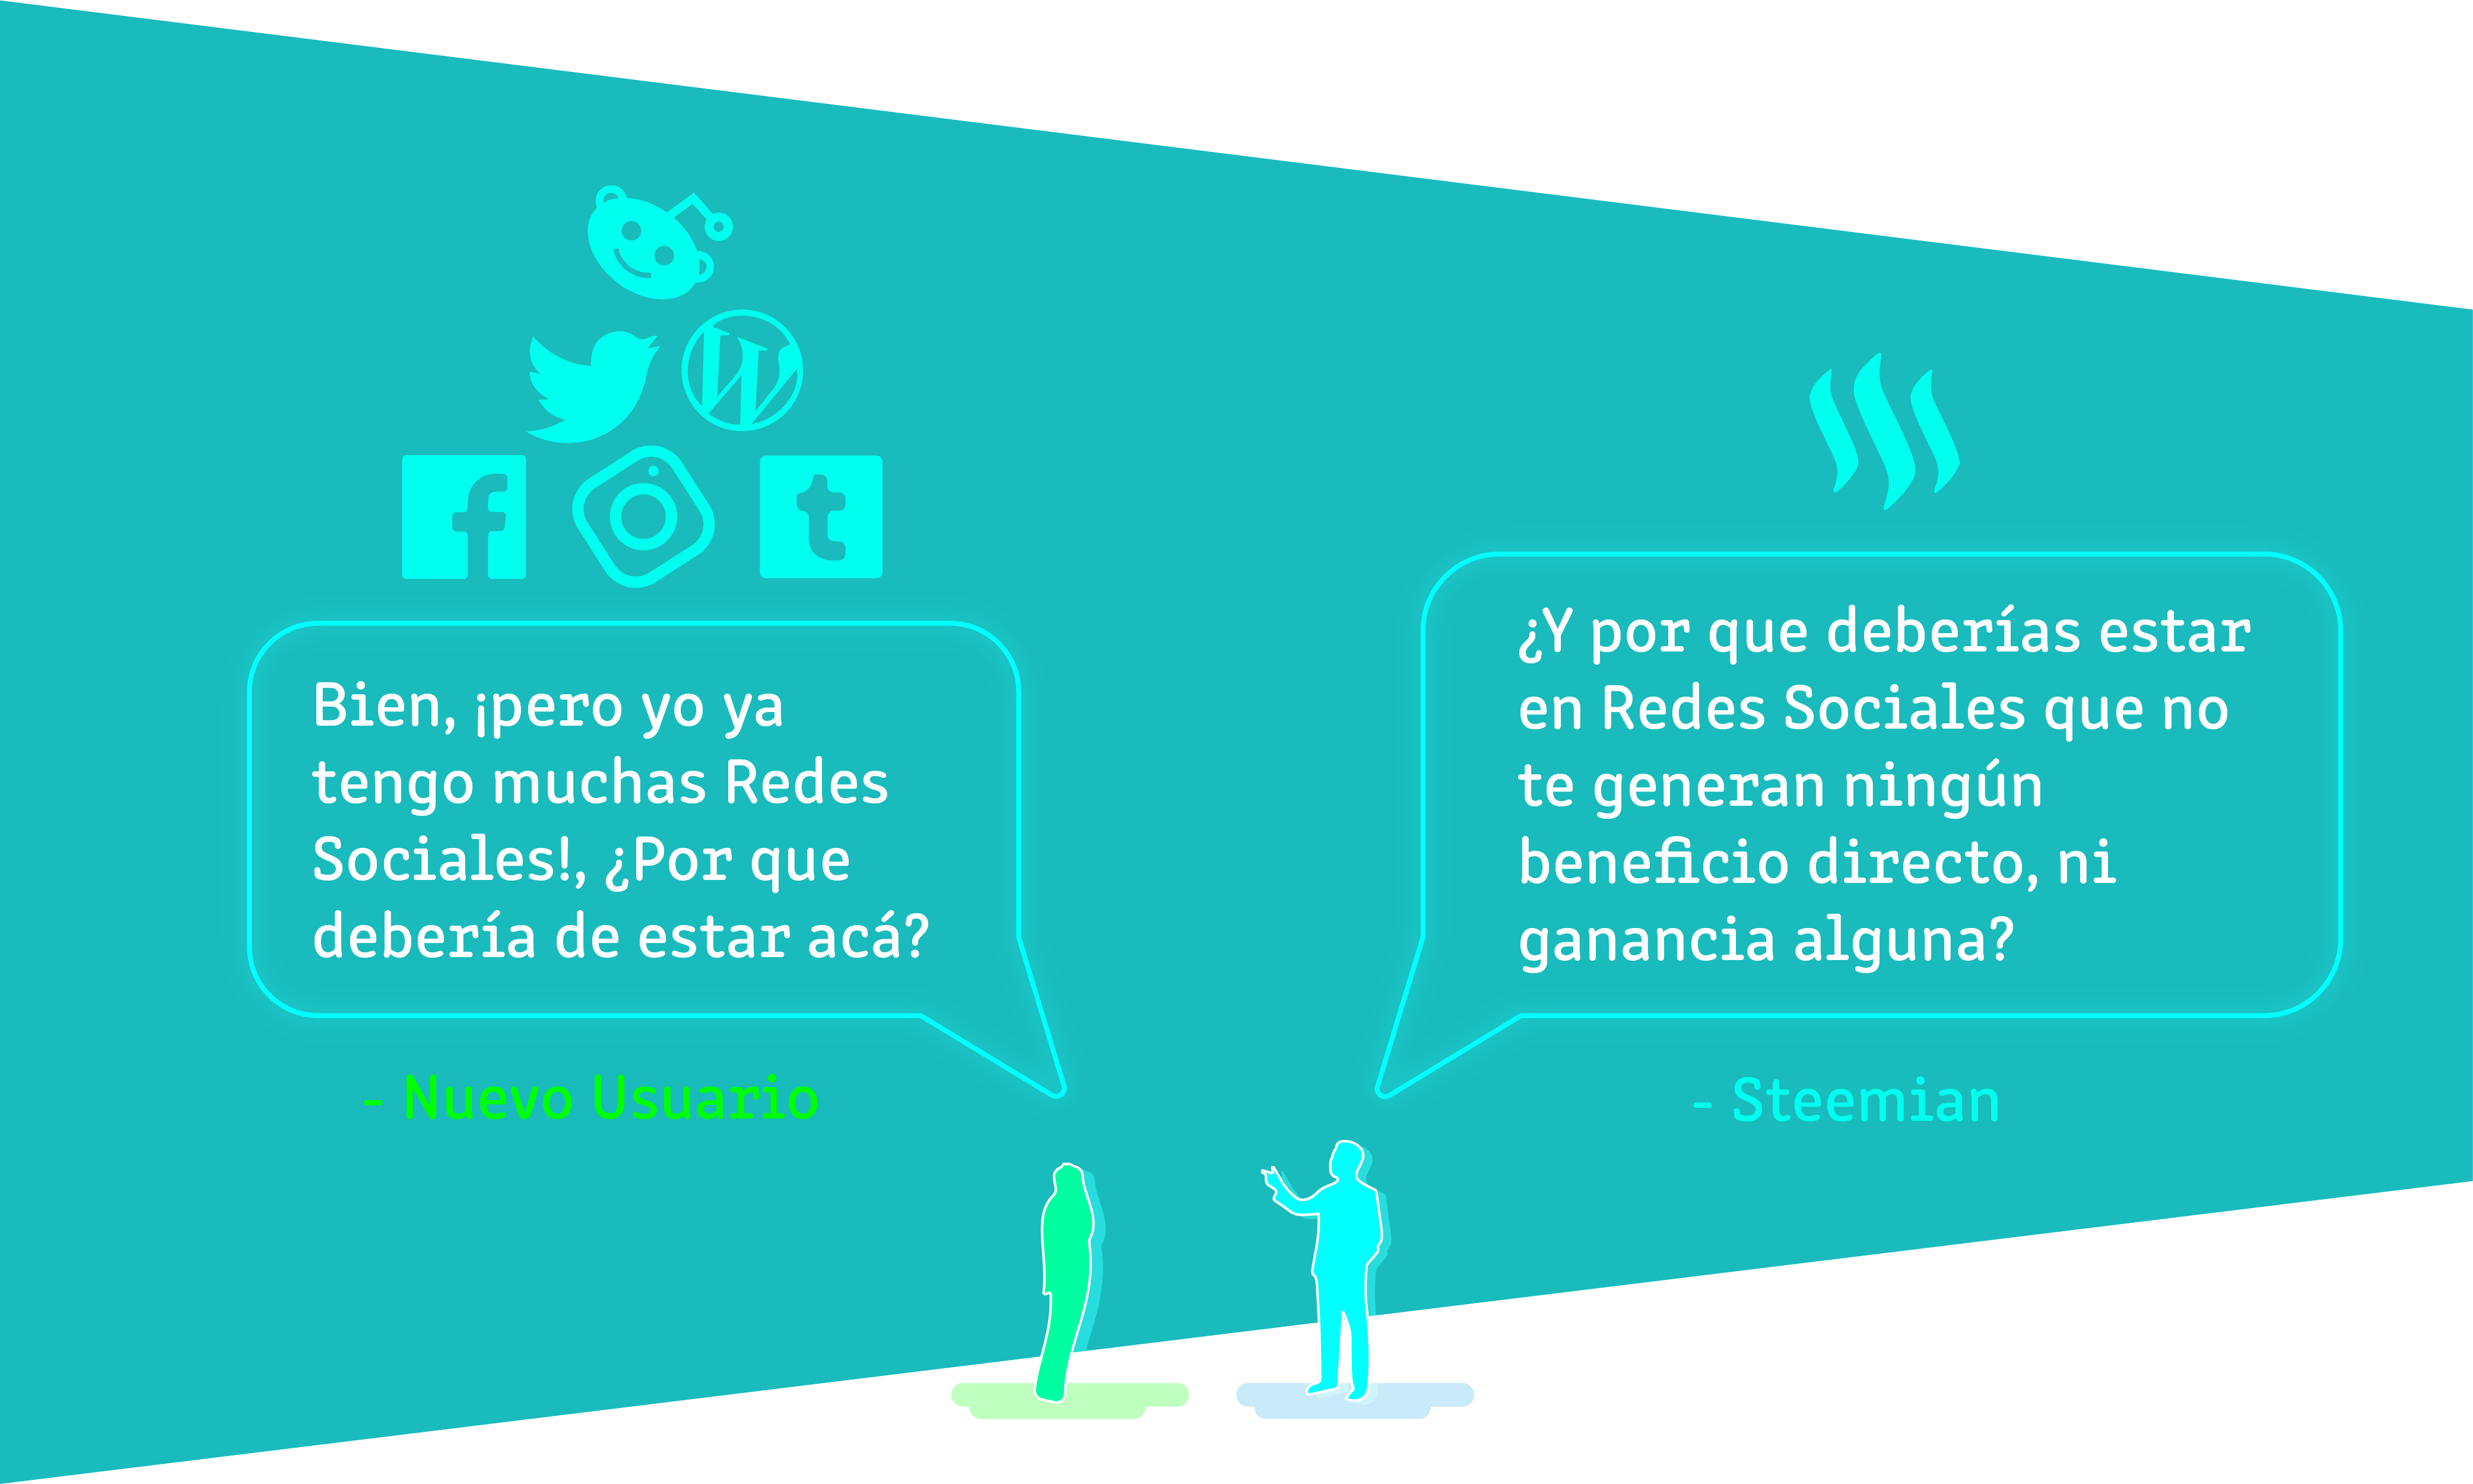 171001_Espanol_Welcome-to-Steemit-04.png